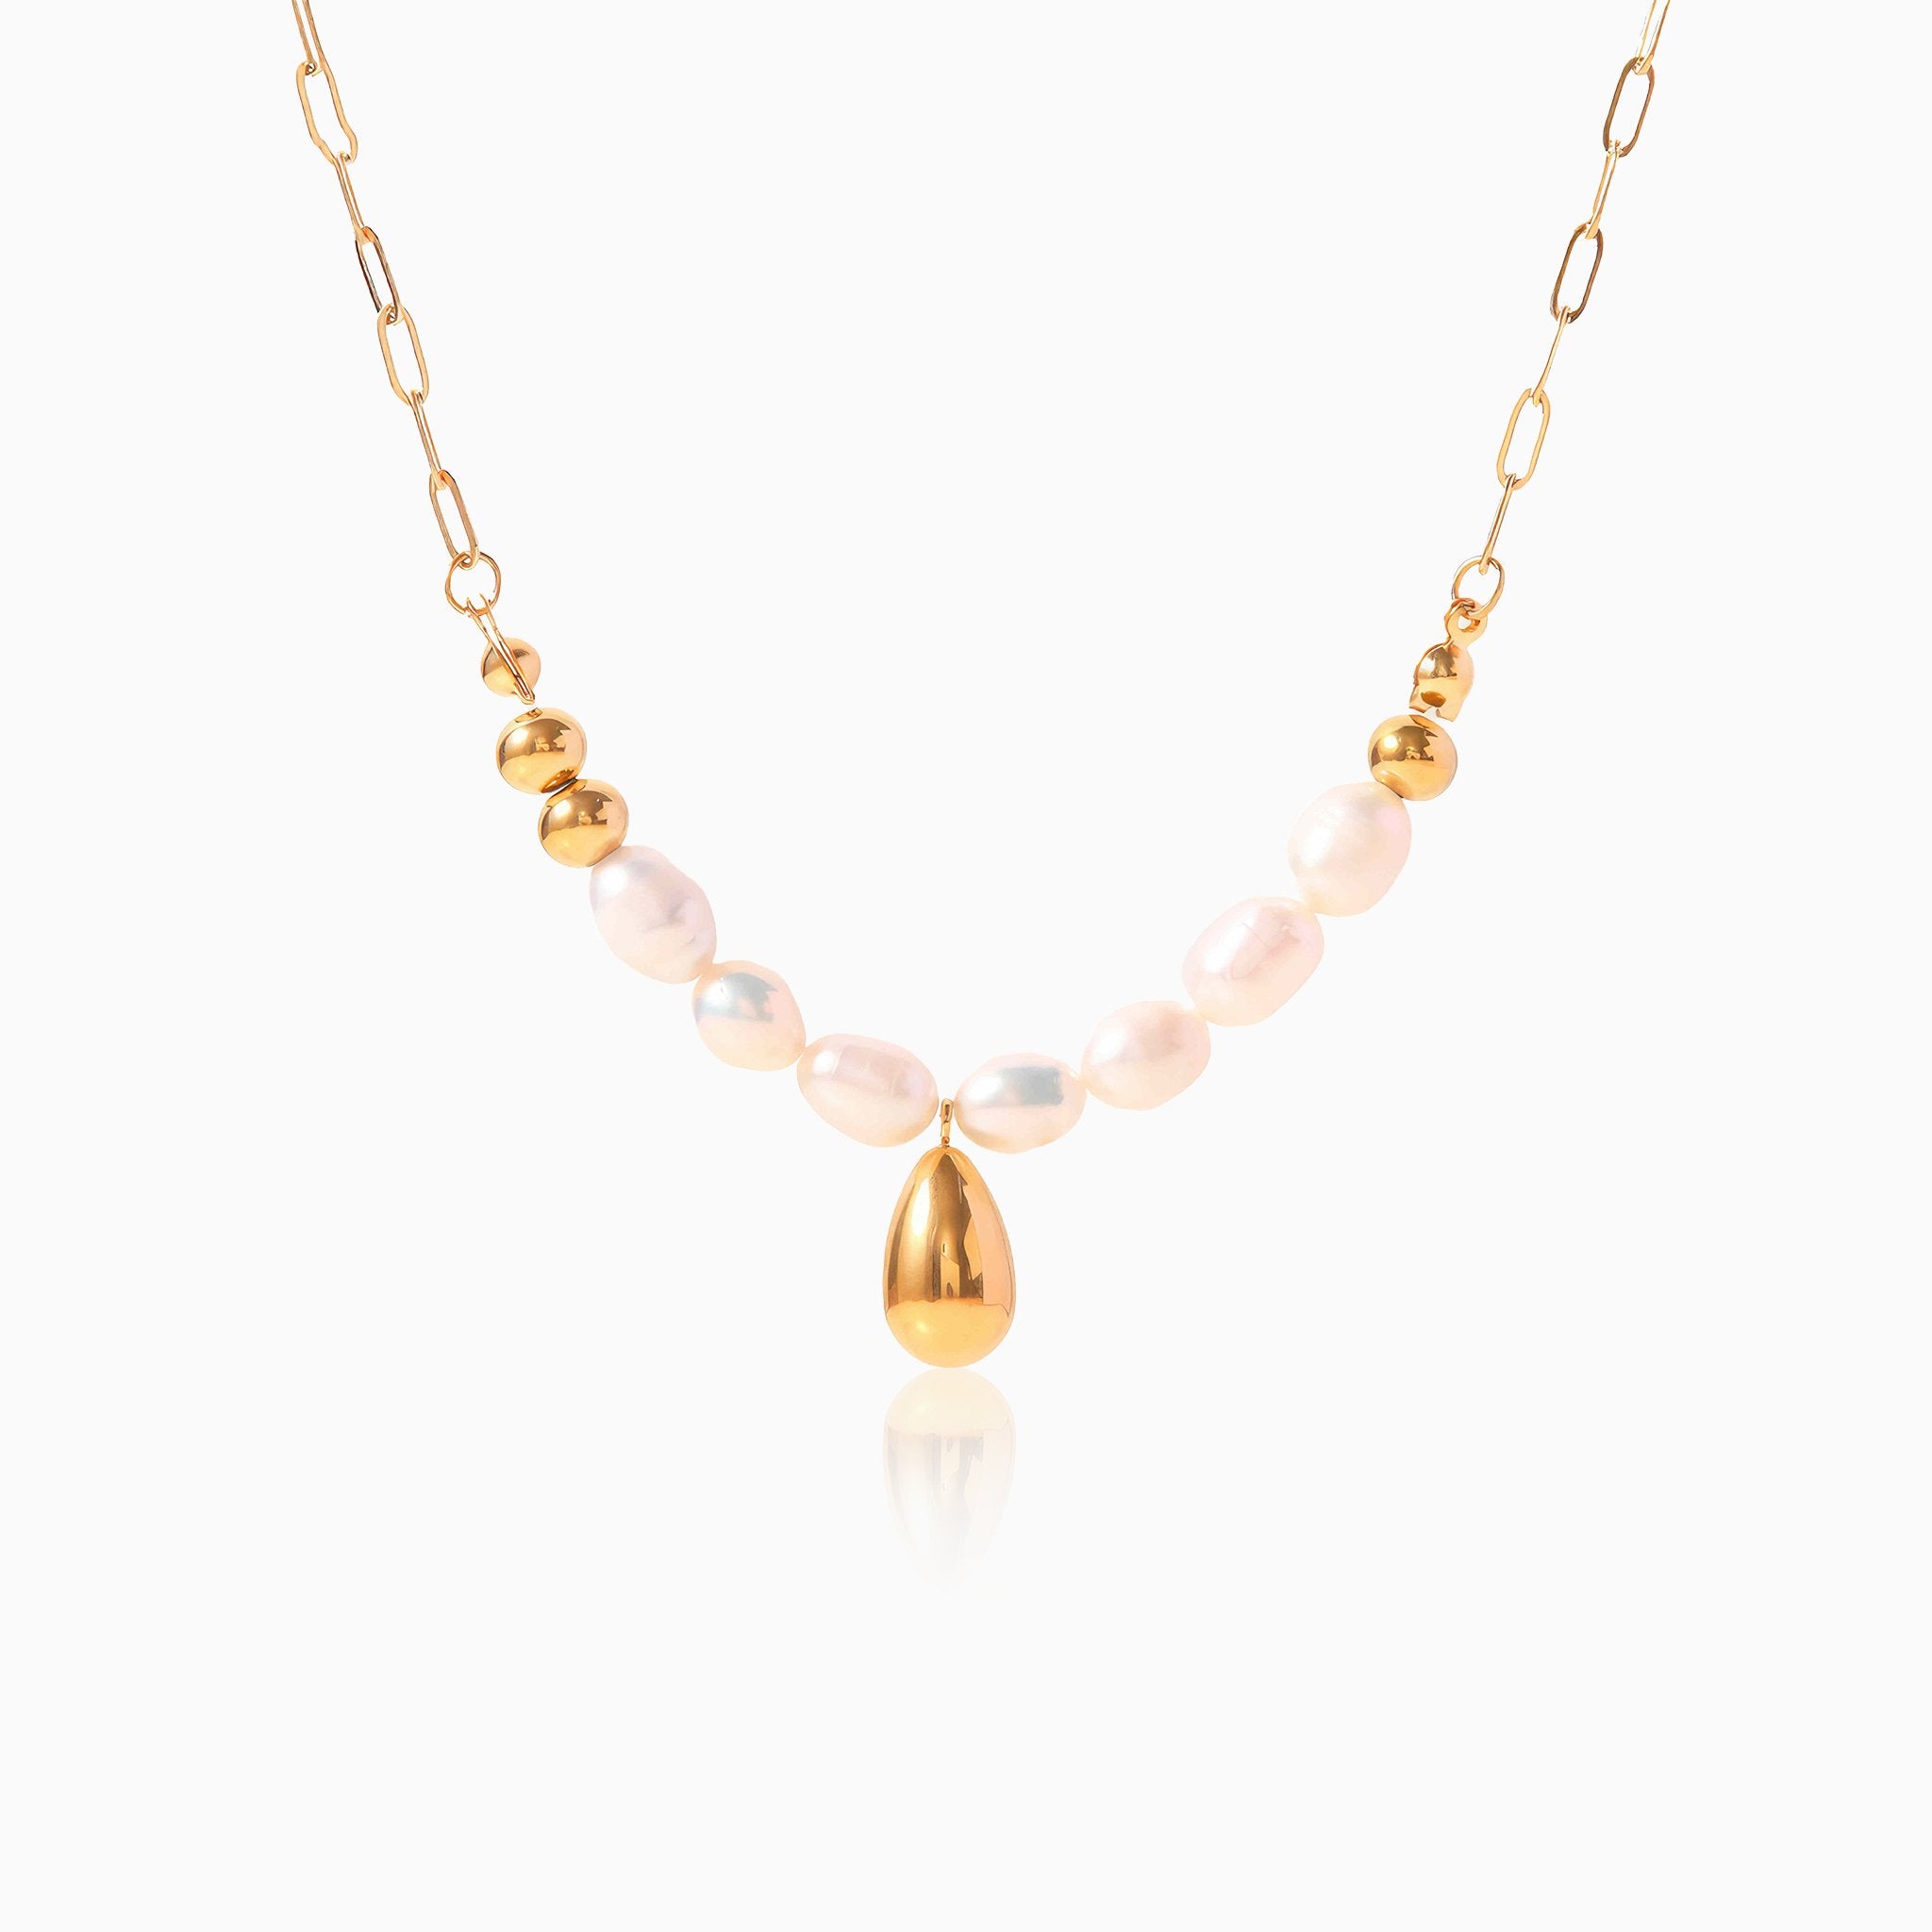 Baroque Freshwater Pearl Necklace - Nobbier - Necklace - 18K Gold And Titanium PVD Coated Jewelry